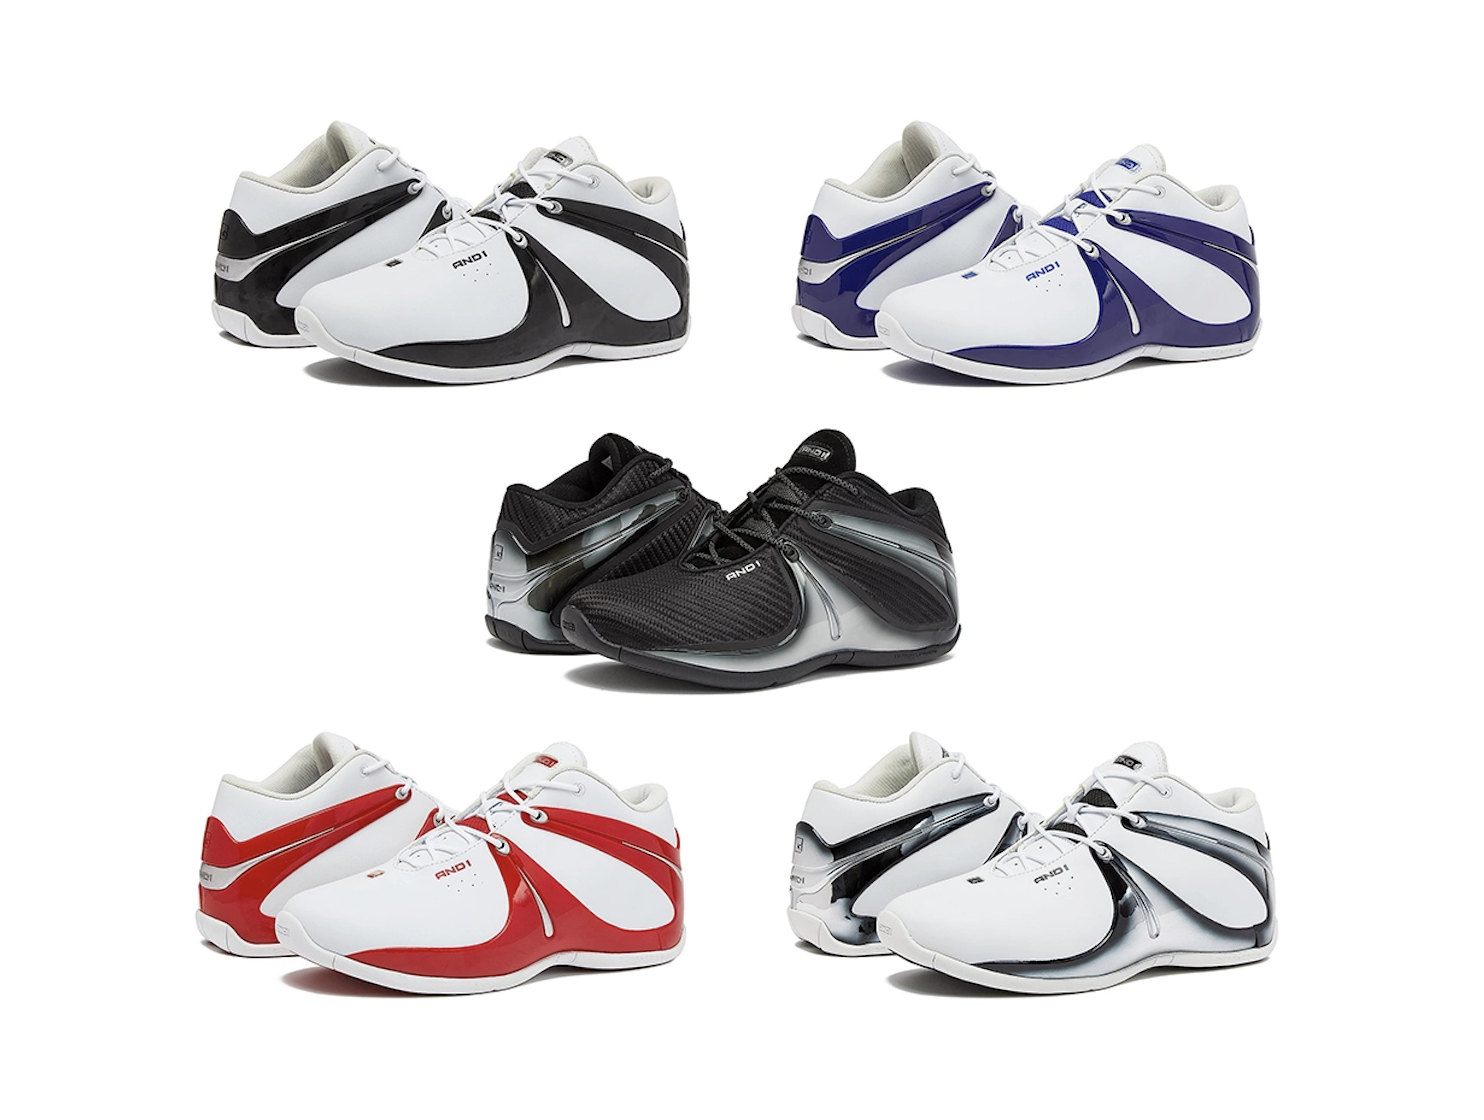 The AND1 Rise Retro Is Available Now In Five Colorways